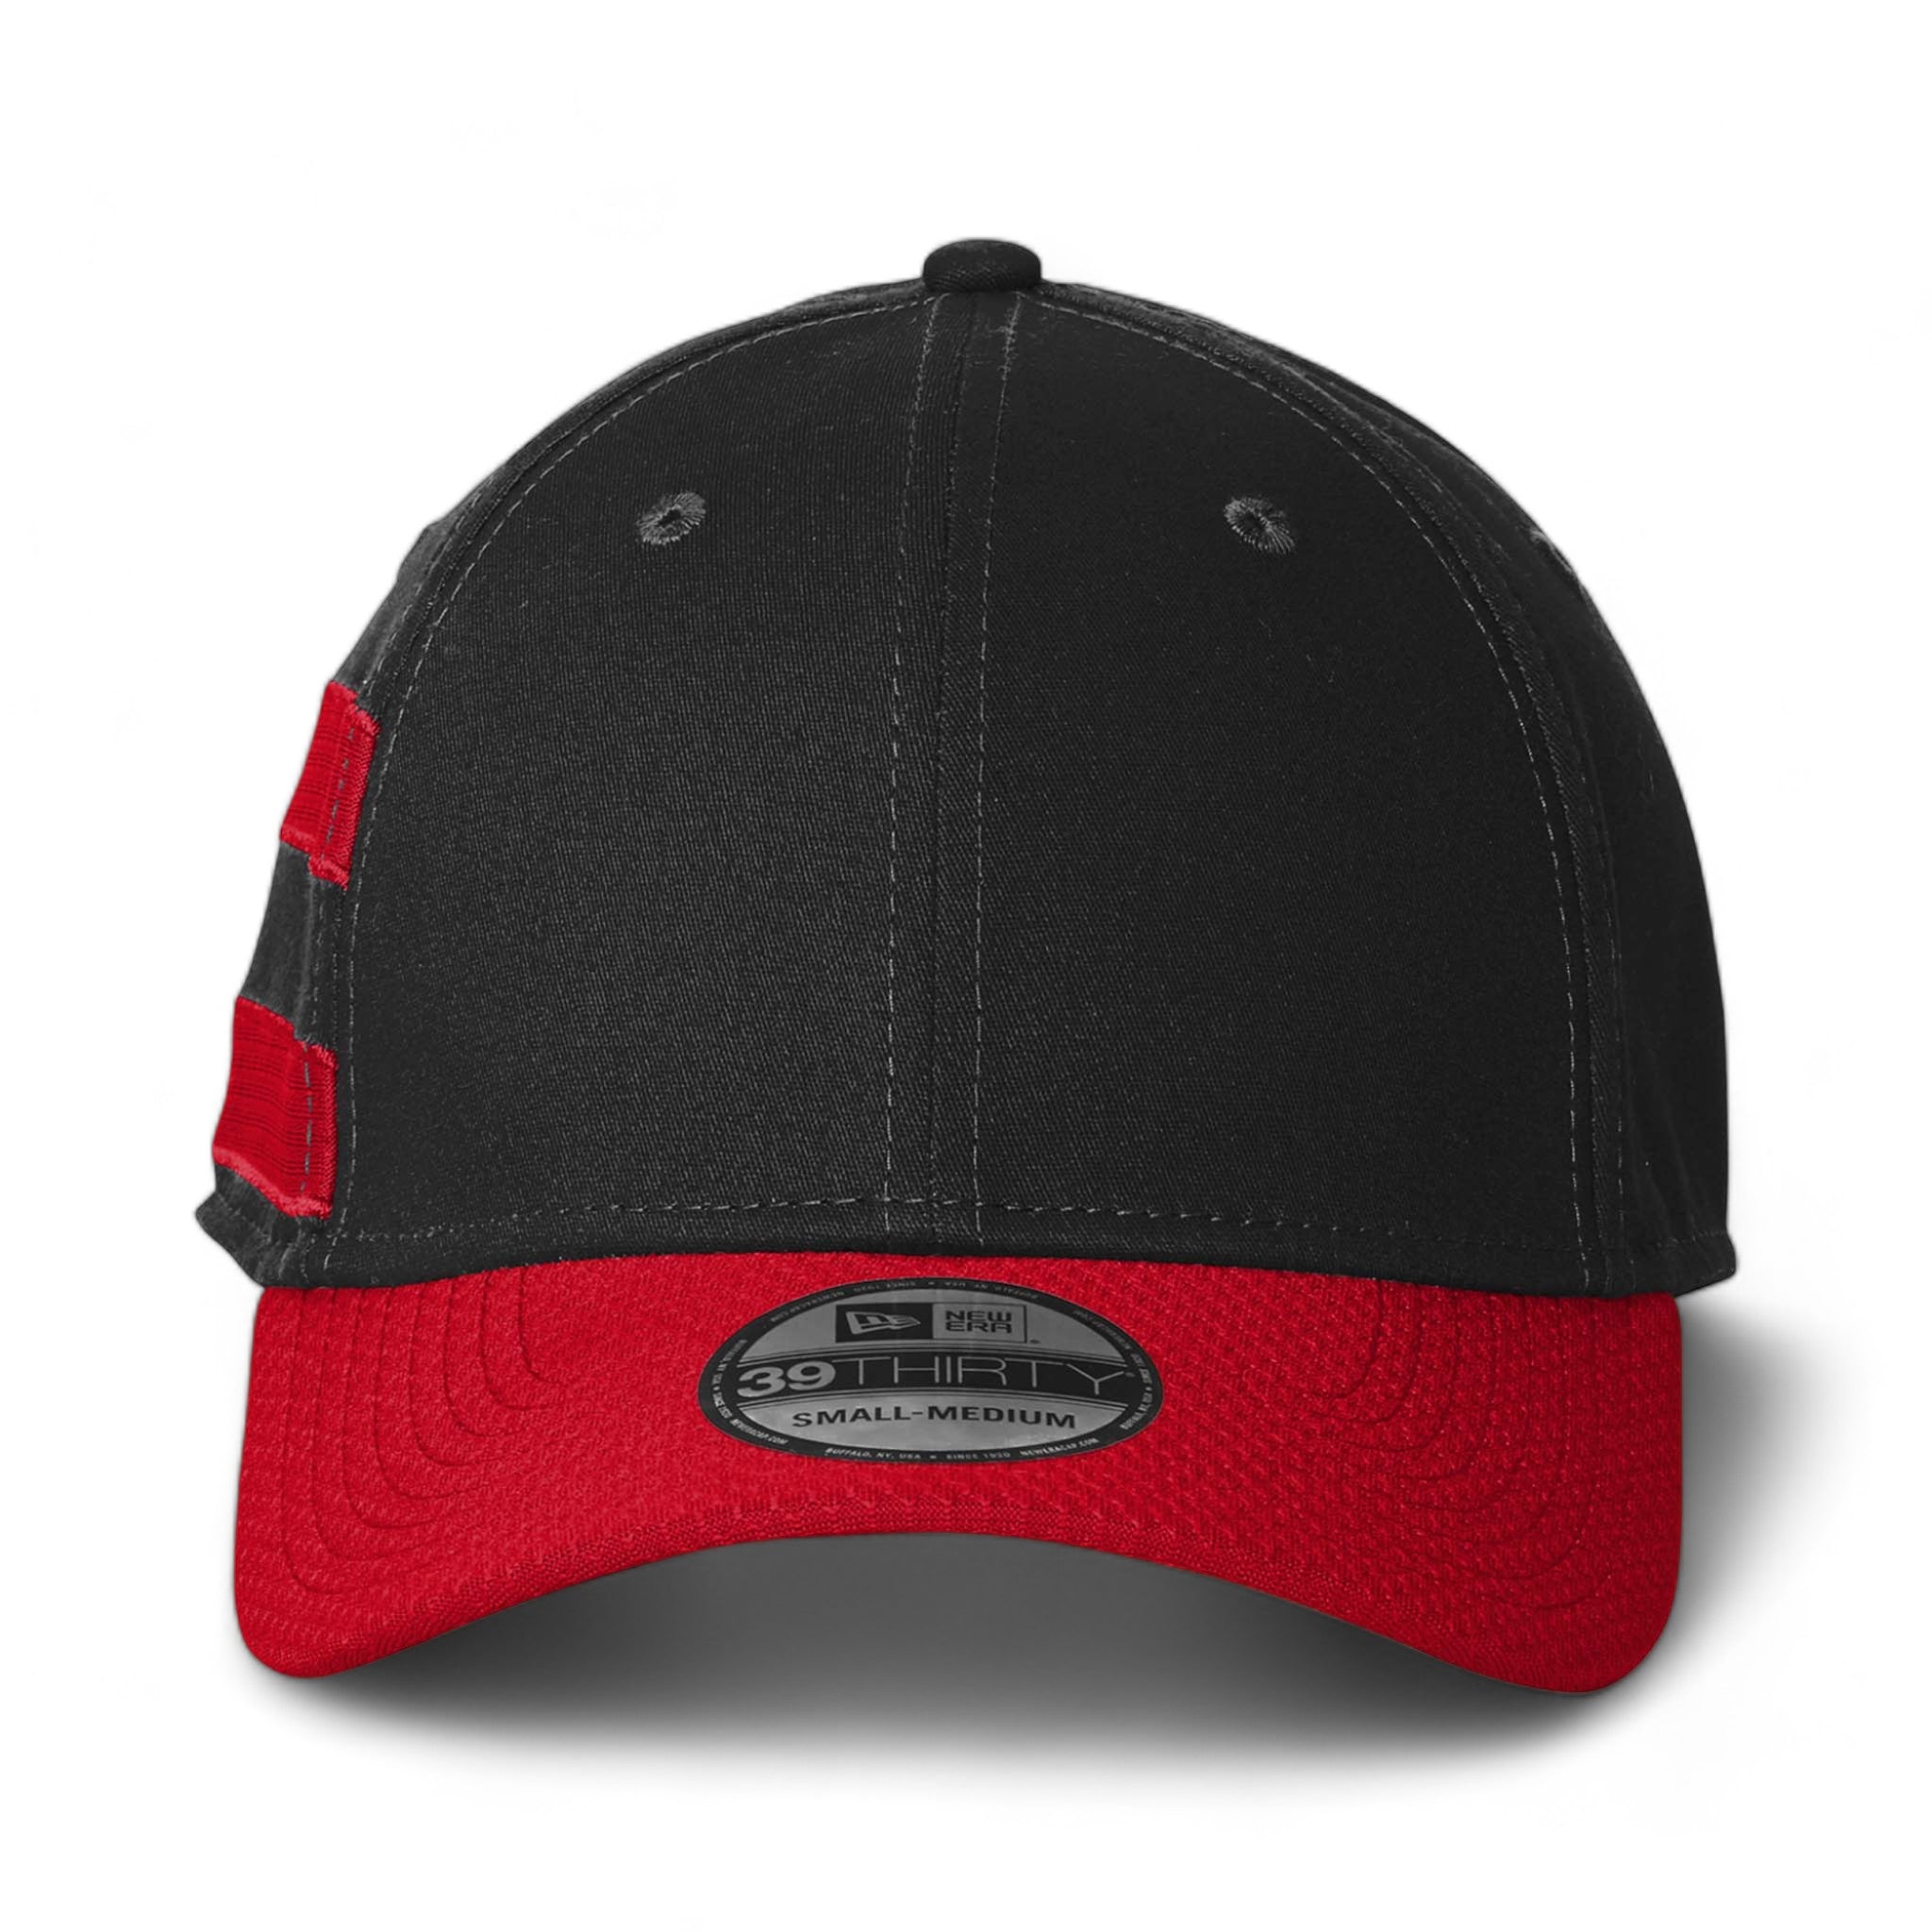 Front view of New Era NE1122 custom hat in black and scarlet